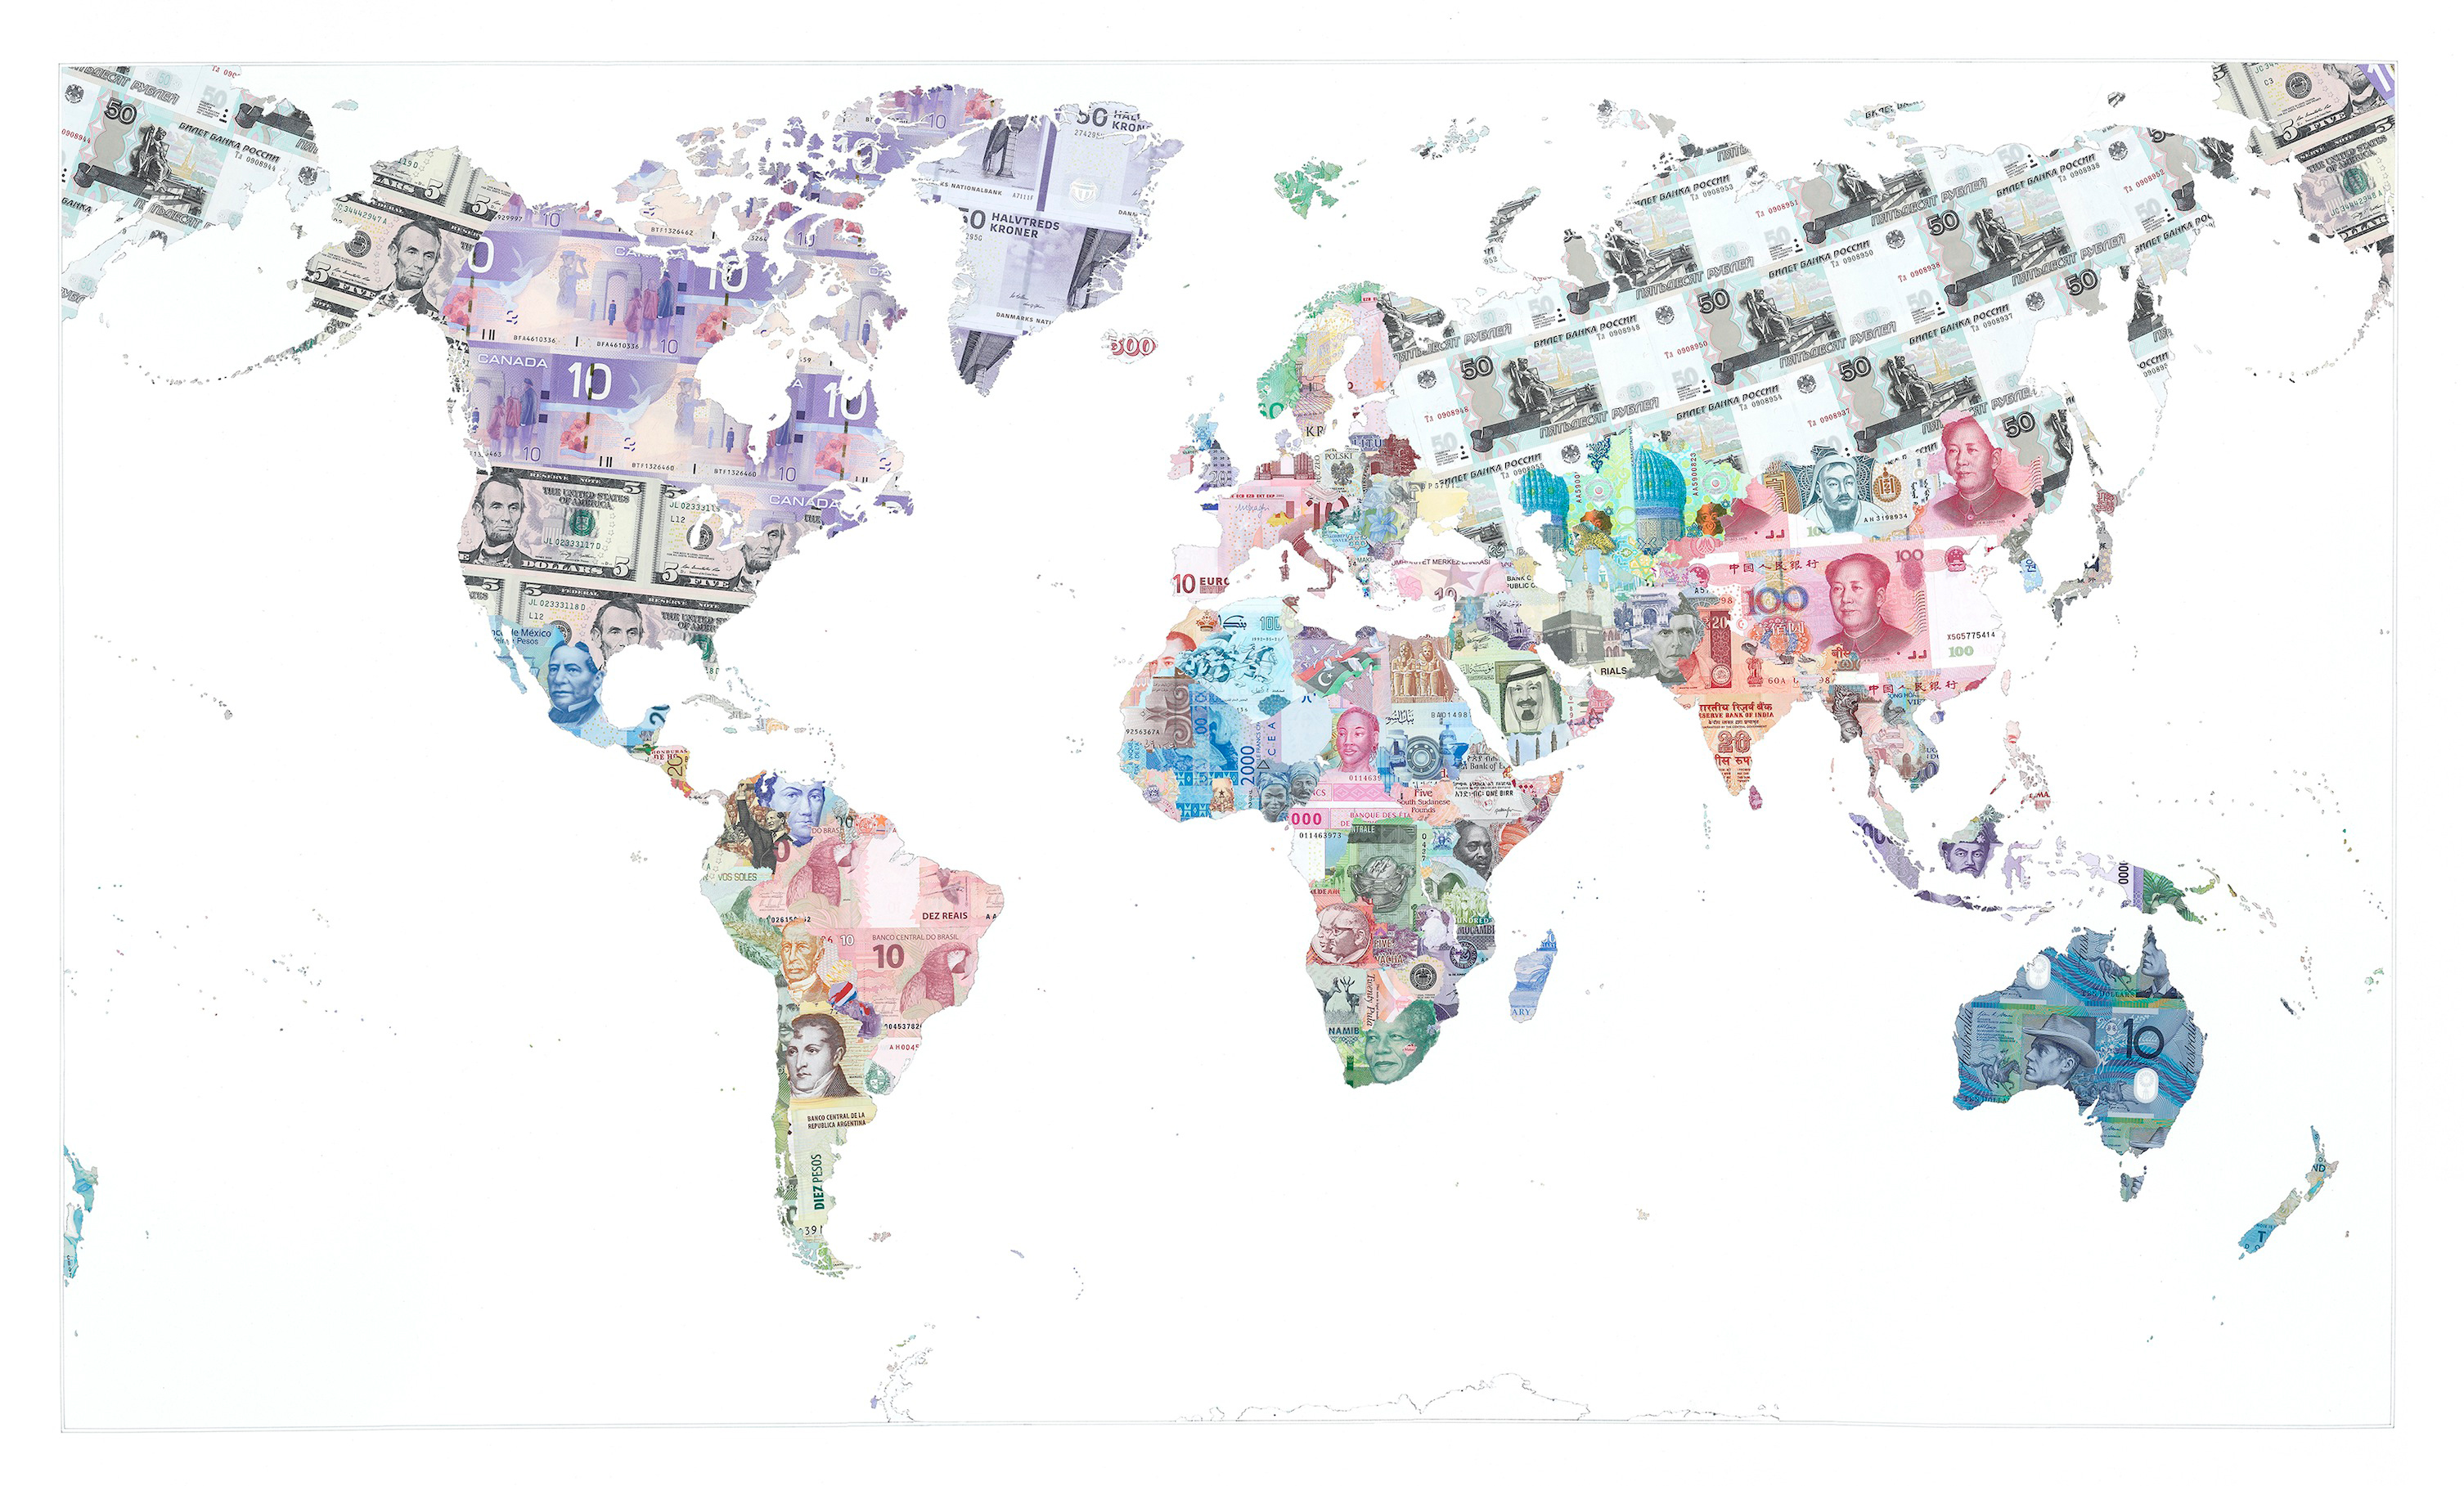 Money Map of the World 2013 - a limited edition money map print by Justine Smith, London